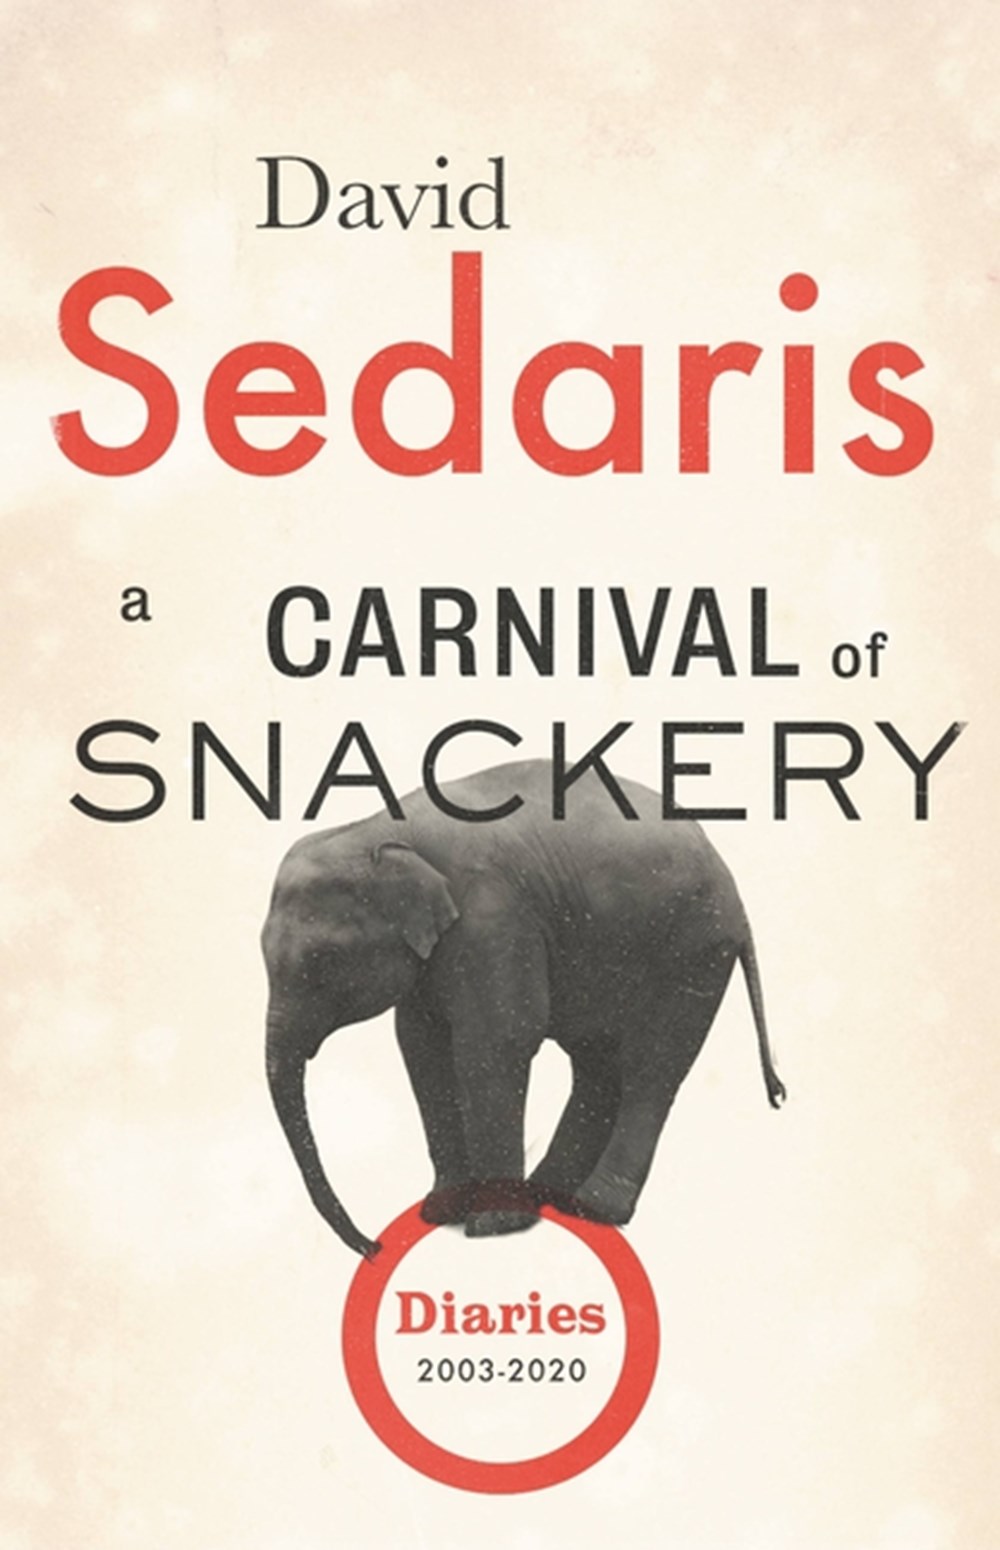 Carnival of Snackery Diaries (2003-2020)